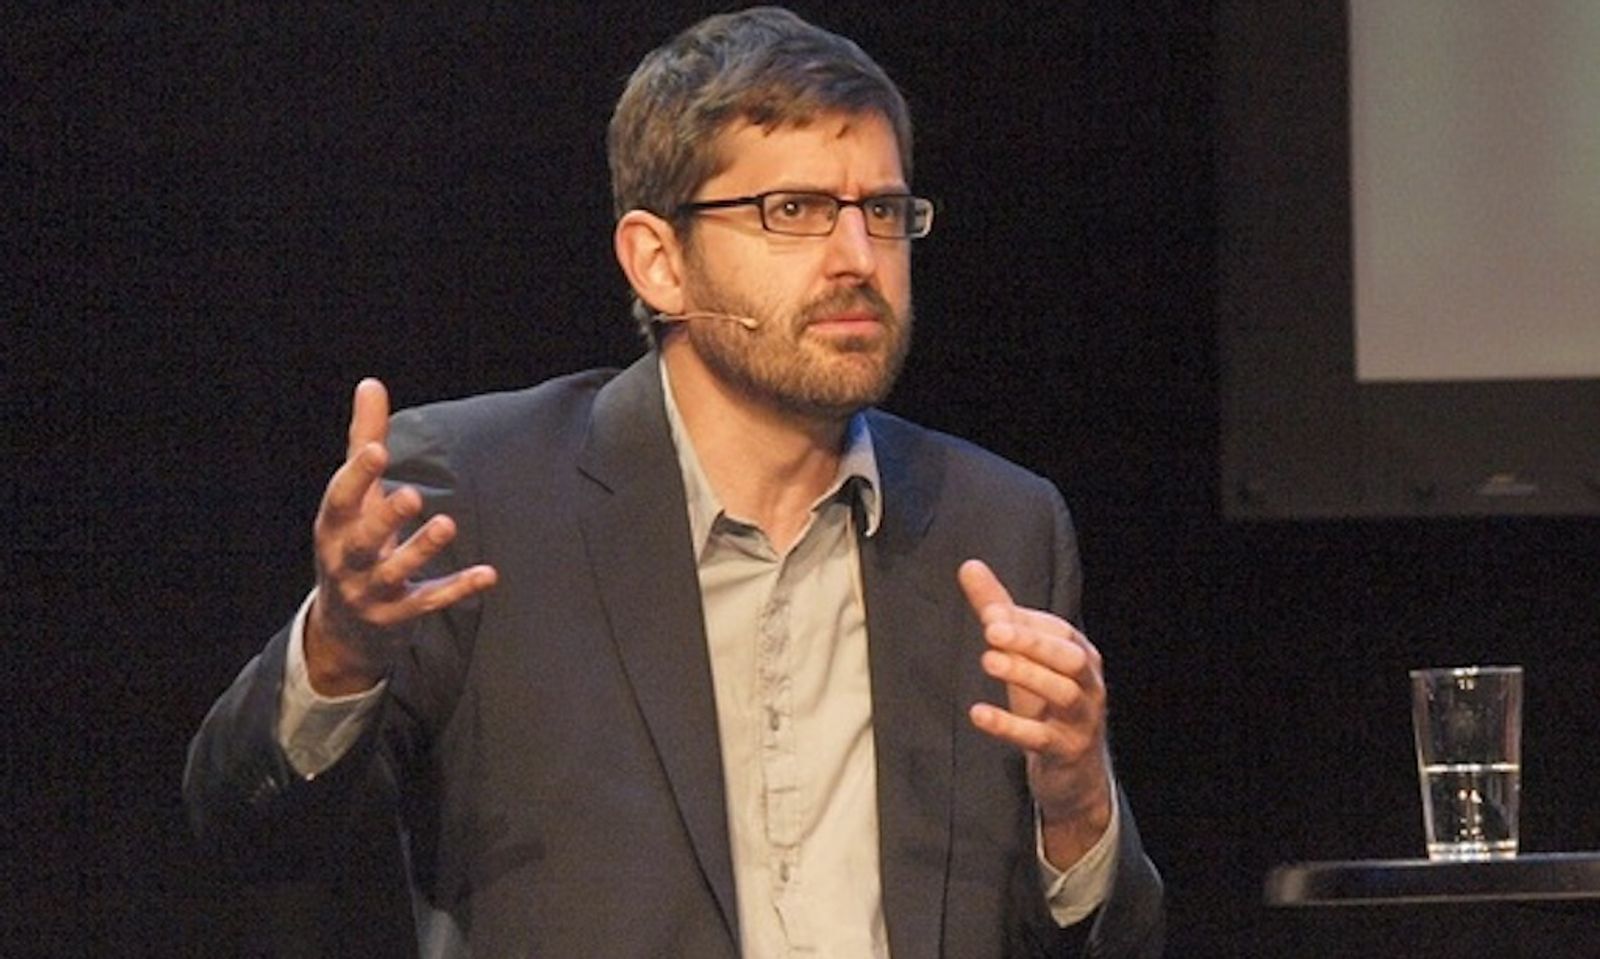 Sex Workers in New Louis Theroux Doc Feel ‘Misled’ by BBC Host